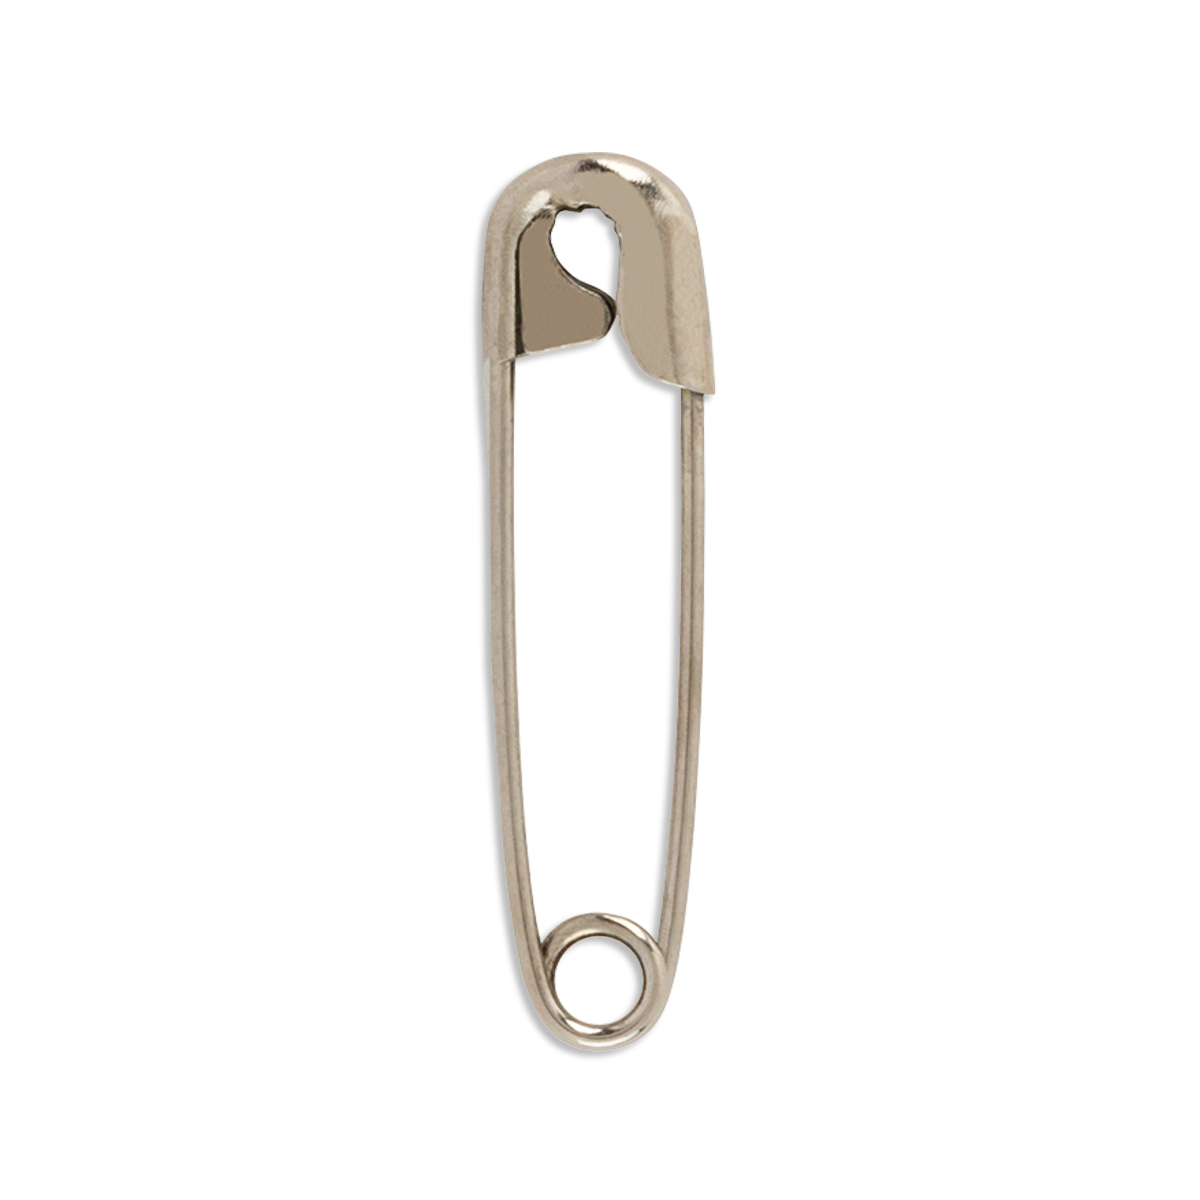 Open Steel Safety Pins - #1 - 1 1/16 - 1,440/Box